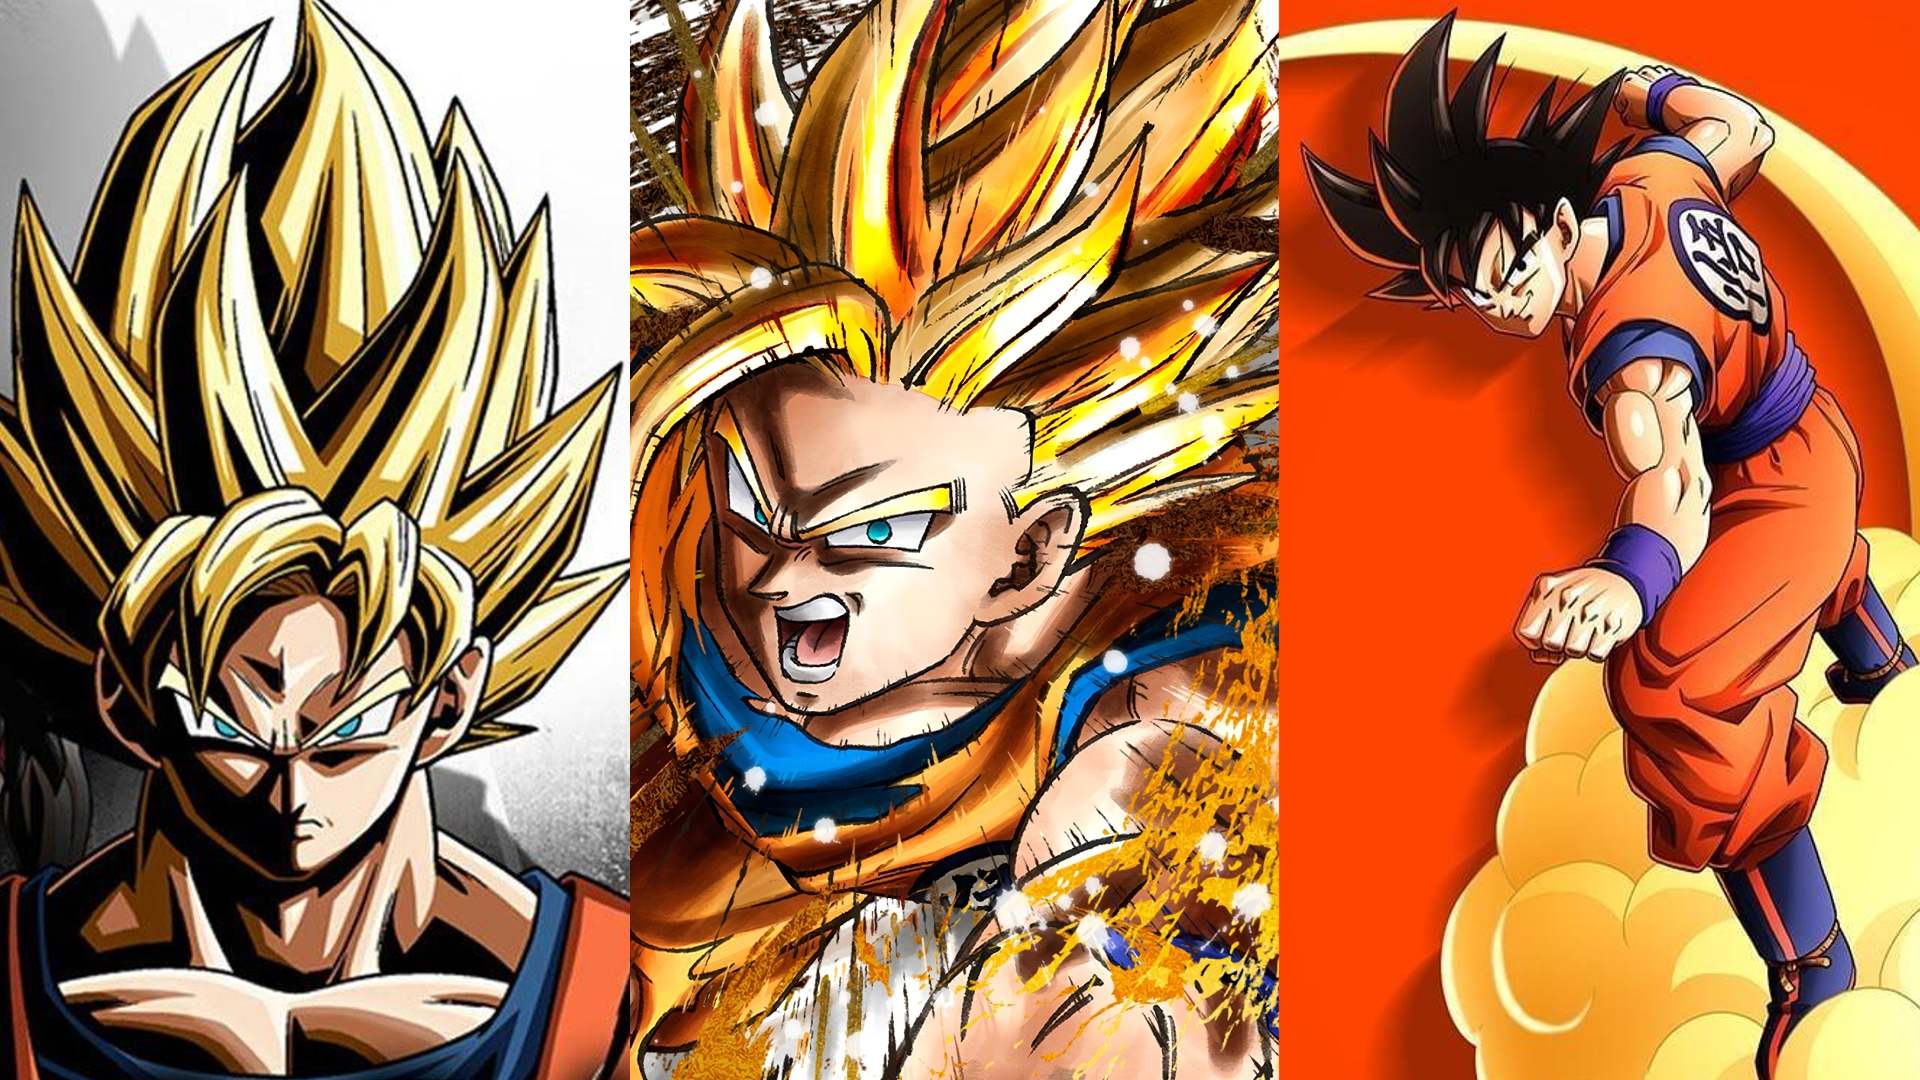 Dragon Ball Z games offered a fresh spin on the story almost every year, showcasing the amazing characters and story